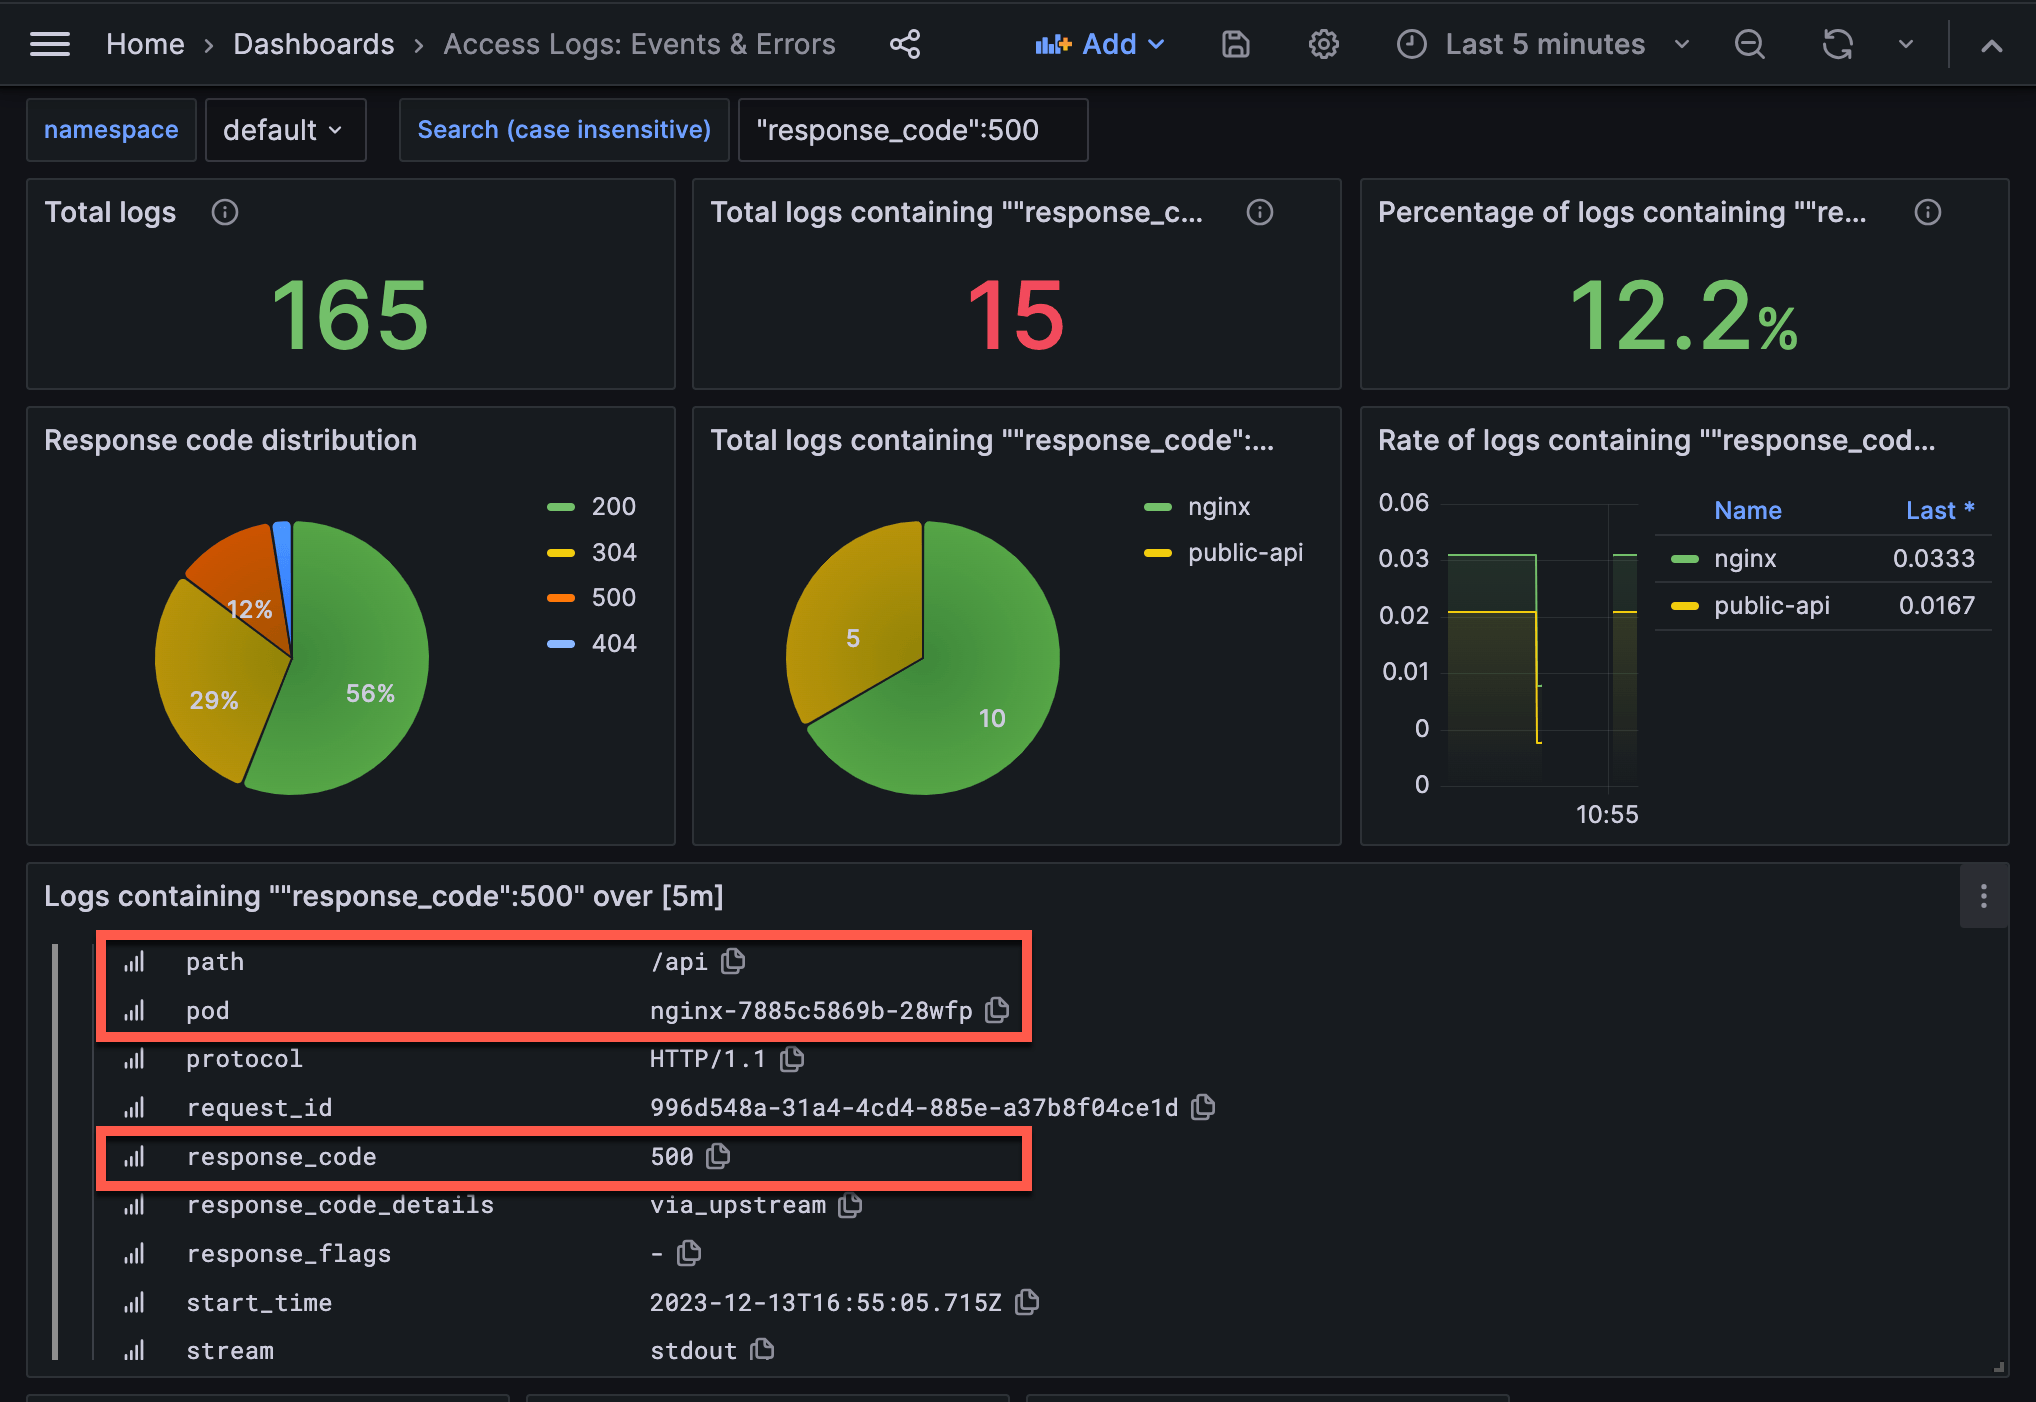 The HashiCups proxy access logs events and errors dashboard. The dashboard displays a wide variety of event and error visualizations with a response code 500 filter applied. Raw access log details for path, pod, and response code are highlighted.